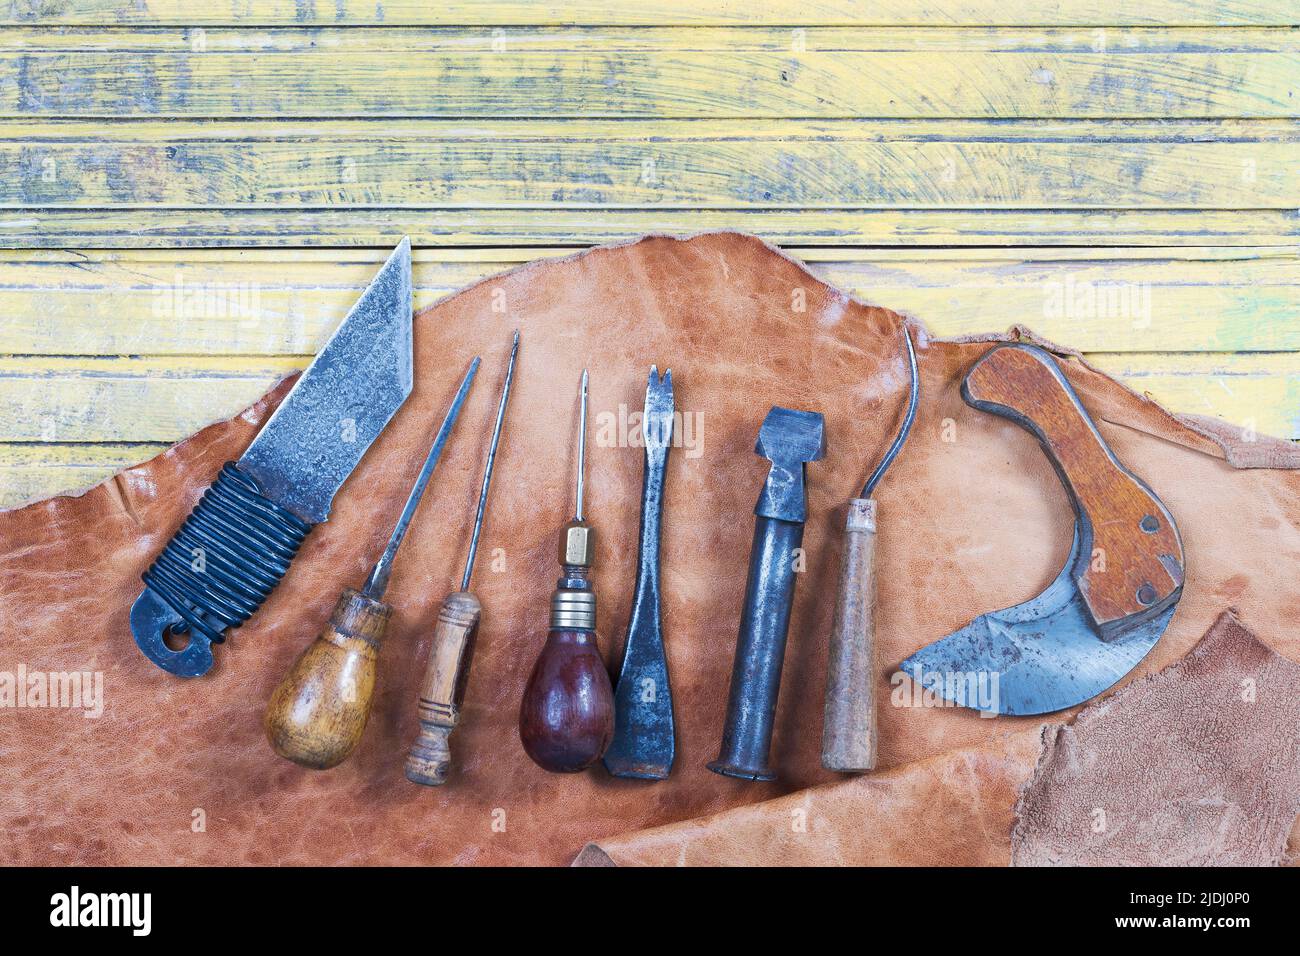 Collection various leather crafting tools Stock Photo by ©vvoennyy 121772652